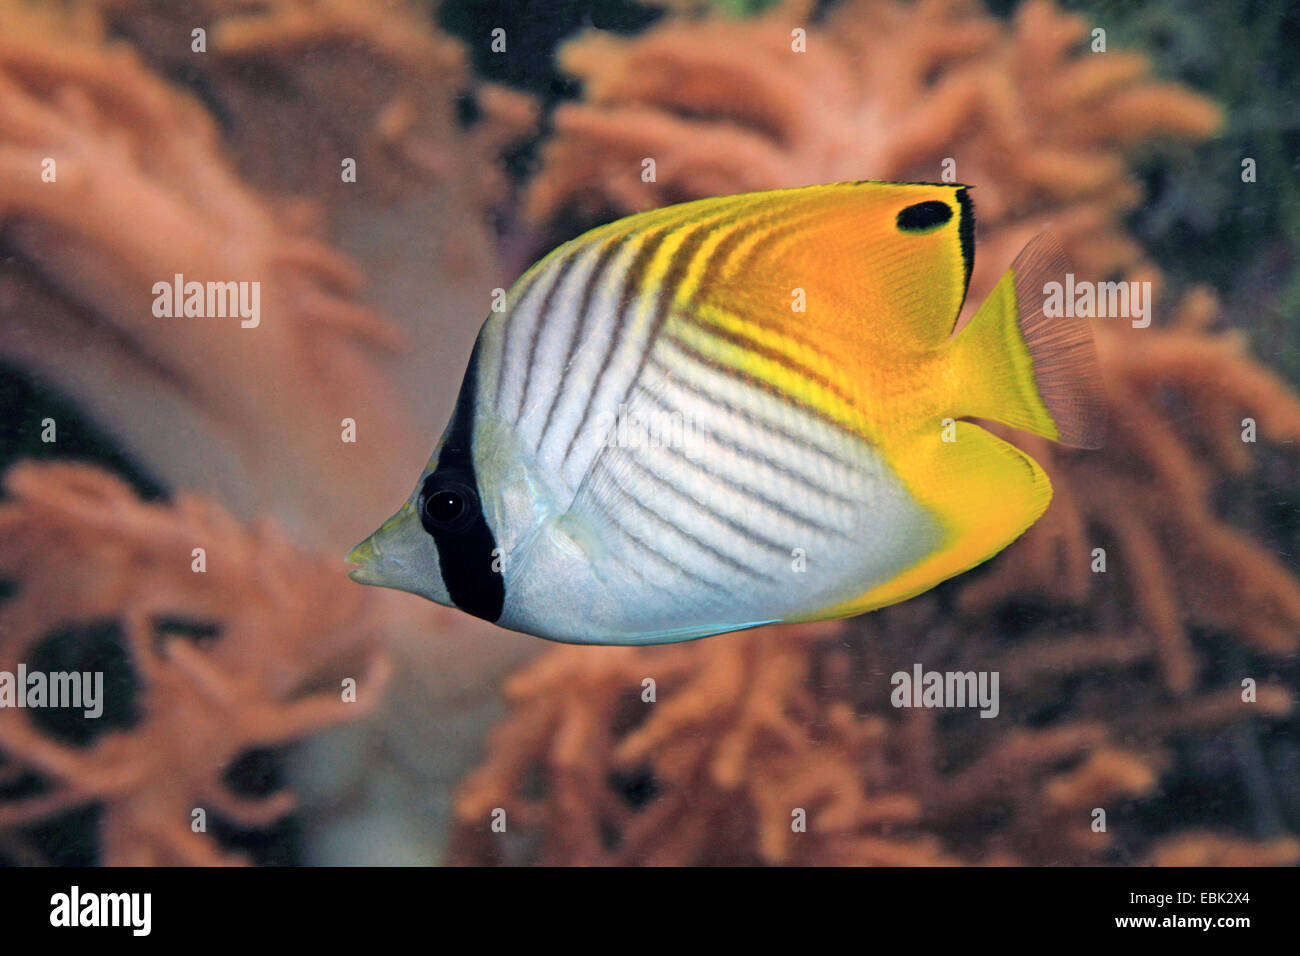 threadfin butterflyfish, spined butterflyfish (Chaetodon auriga), at the reef Stock Photo